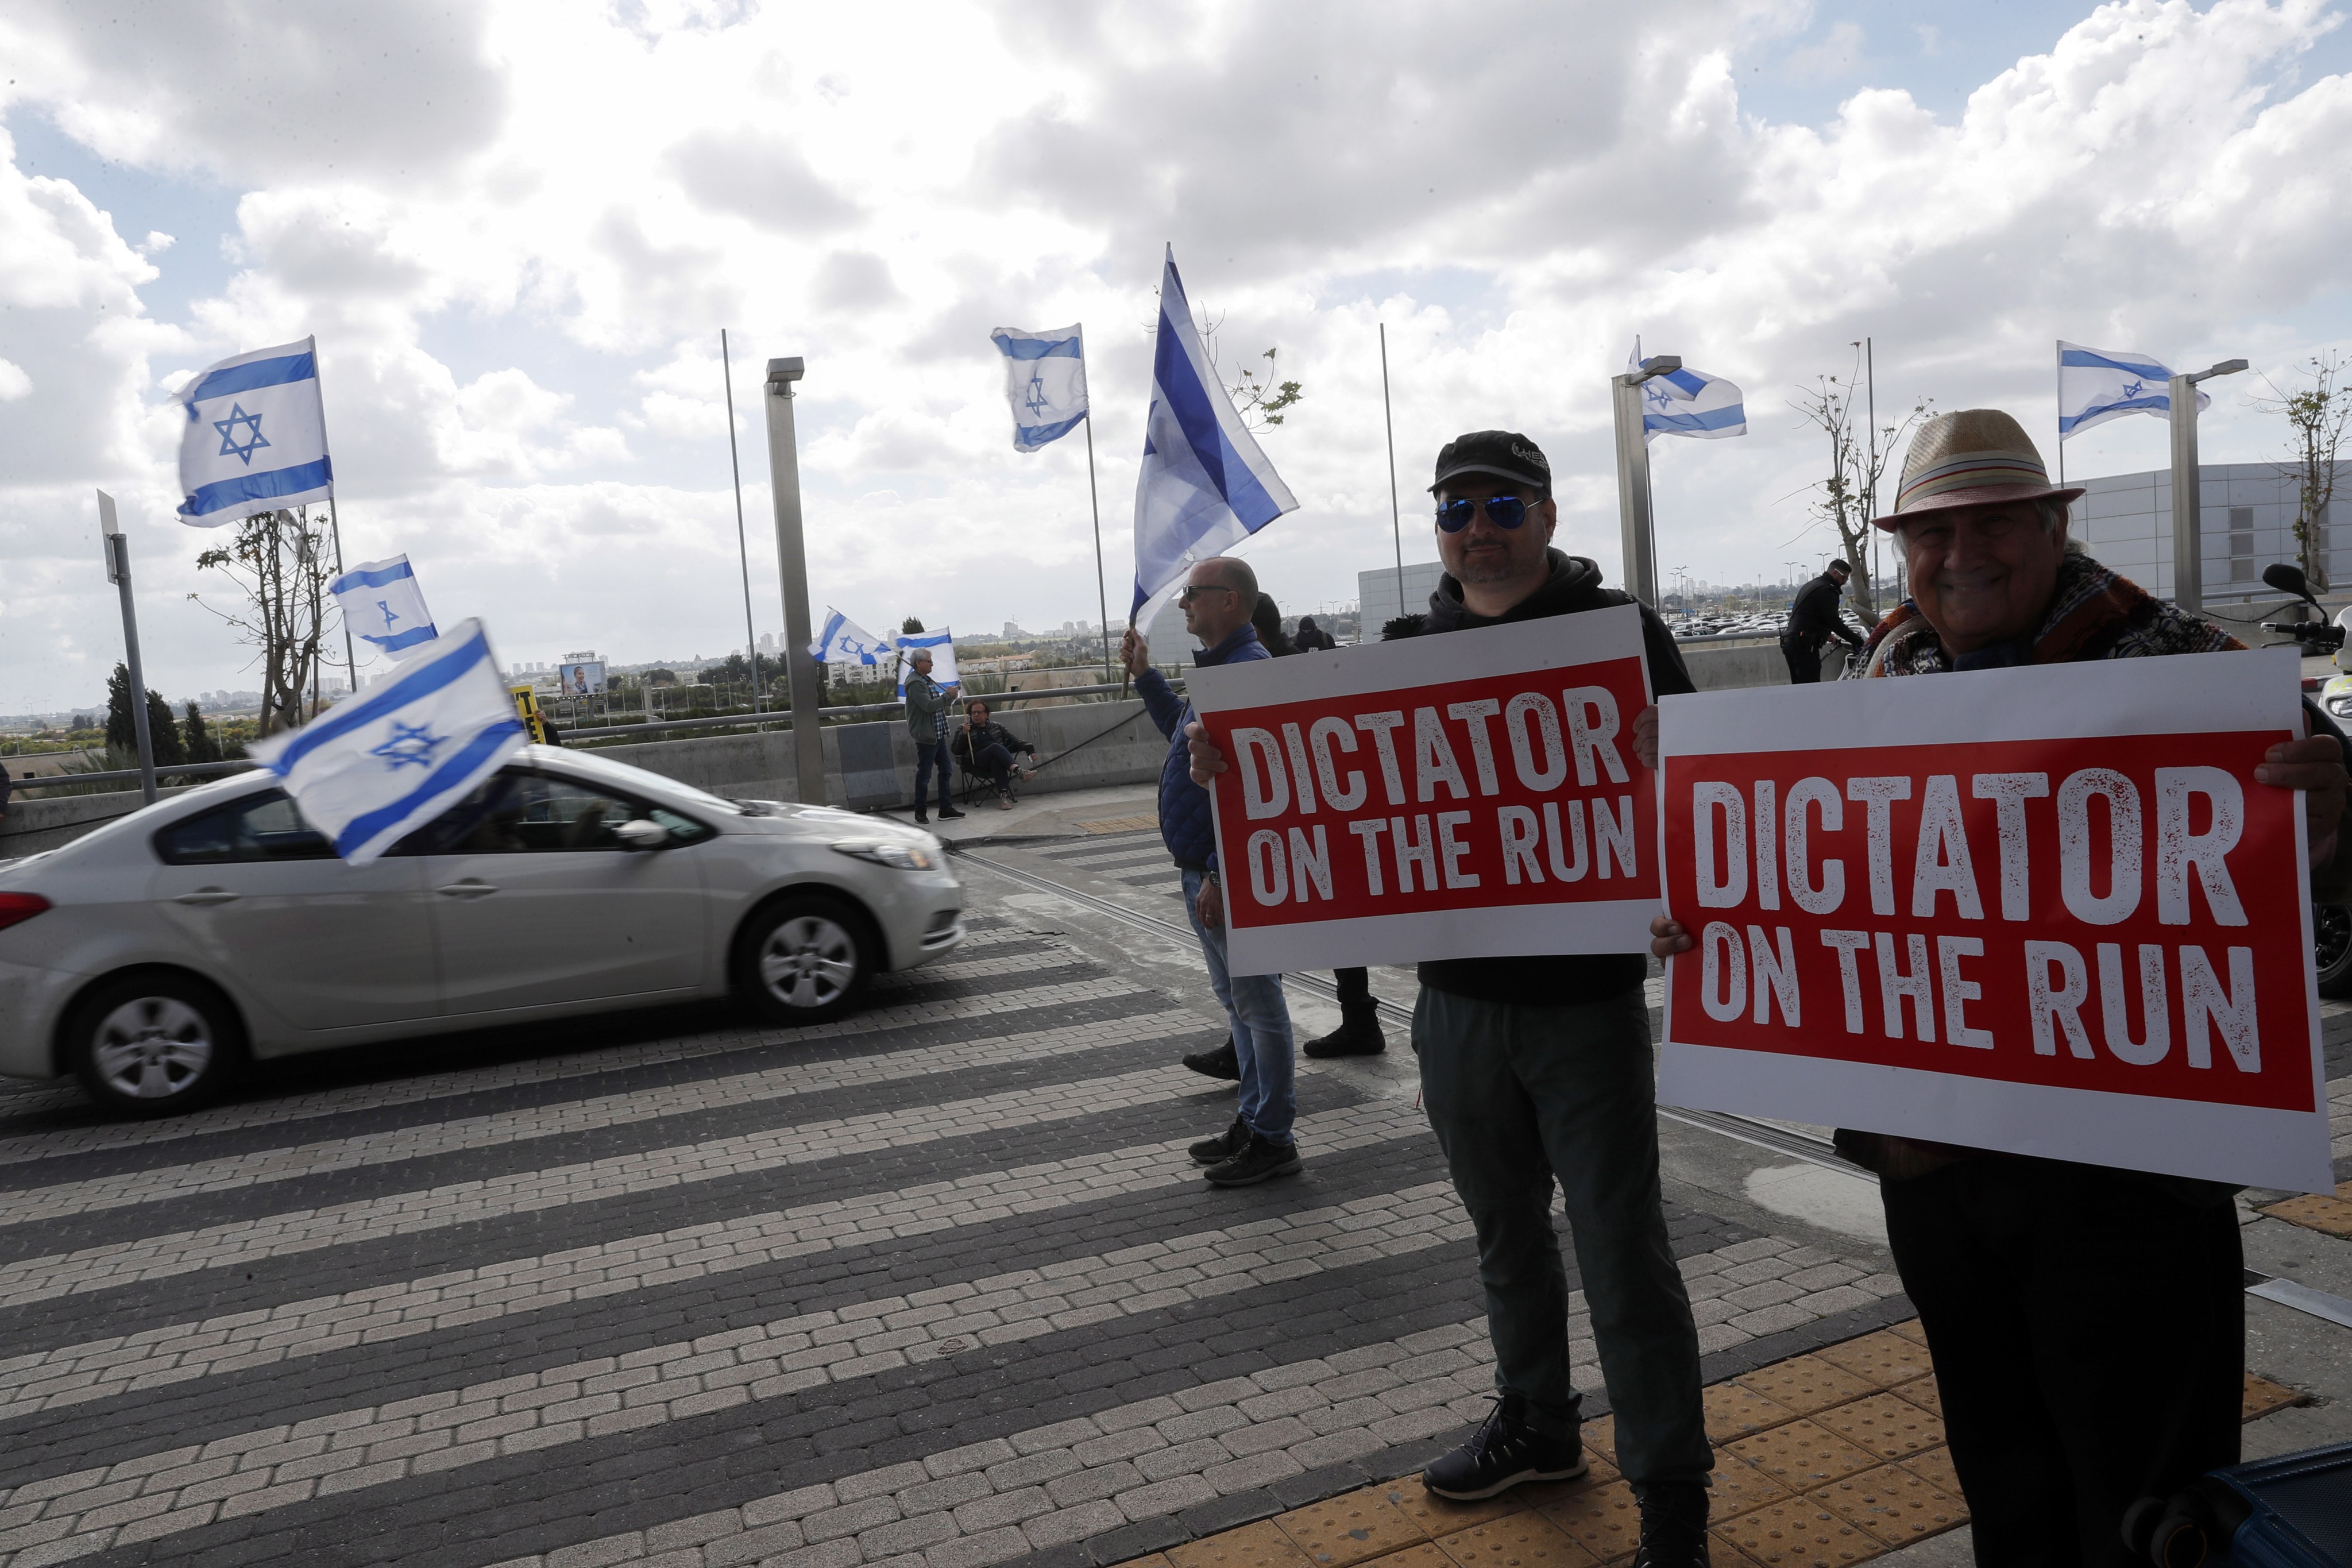 Israelis take part during an anti-government protest at Ben Gurion Airport, ahead of Prime Minister Benjamin Netanyahu’s flight to Germany on Wednesday. Photo: EPA-EFE